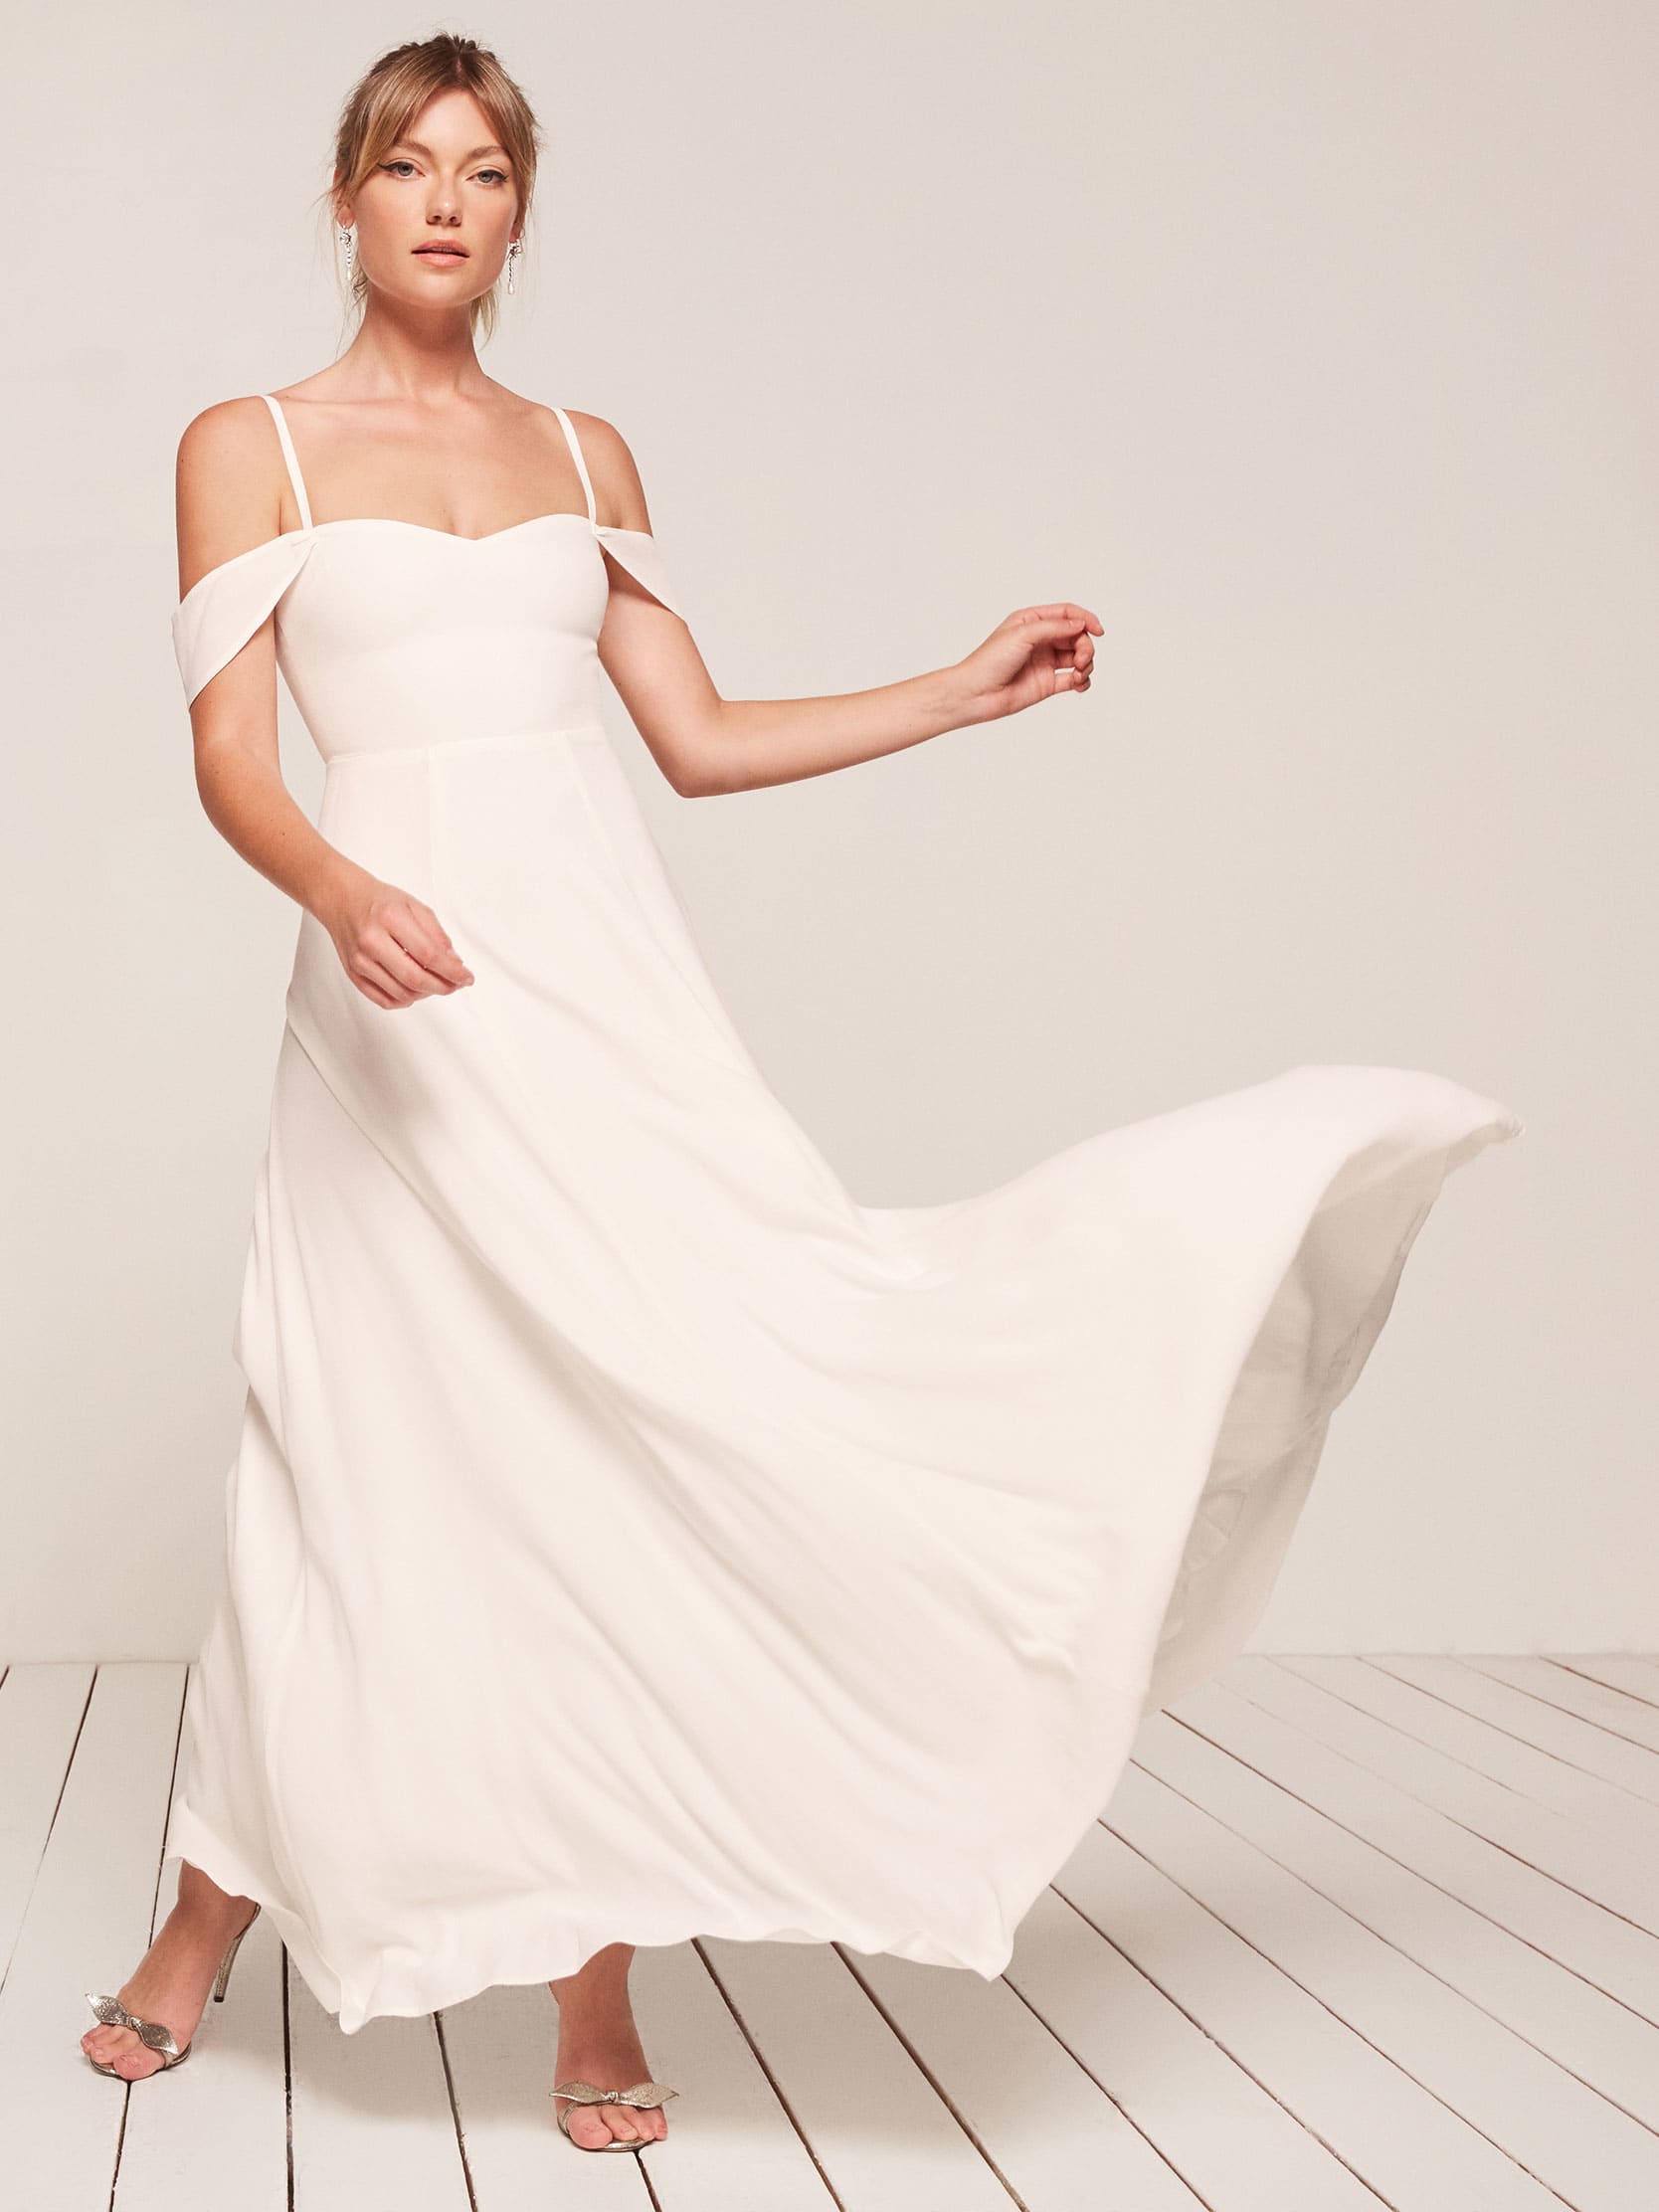 woman wearing a simple off the shoulder wedding dress with thin straps